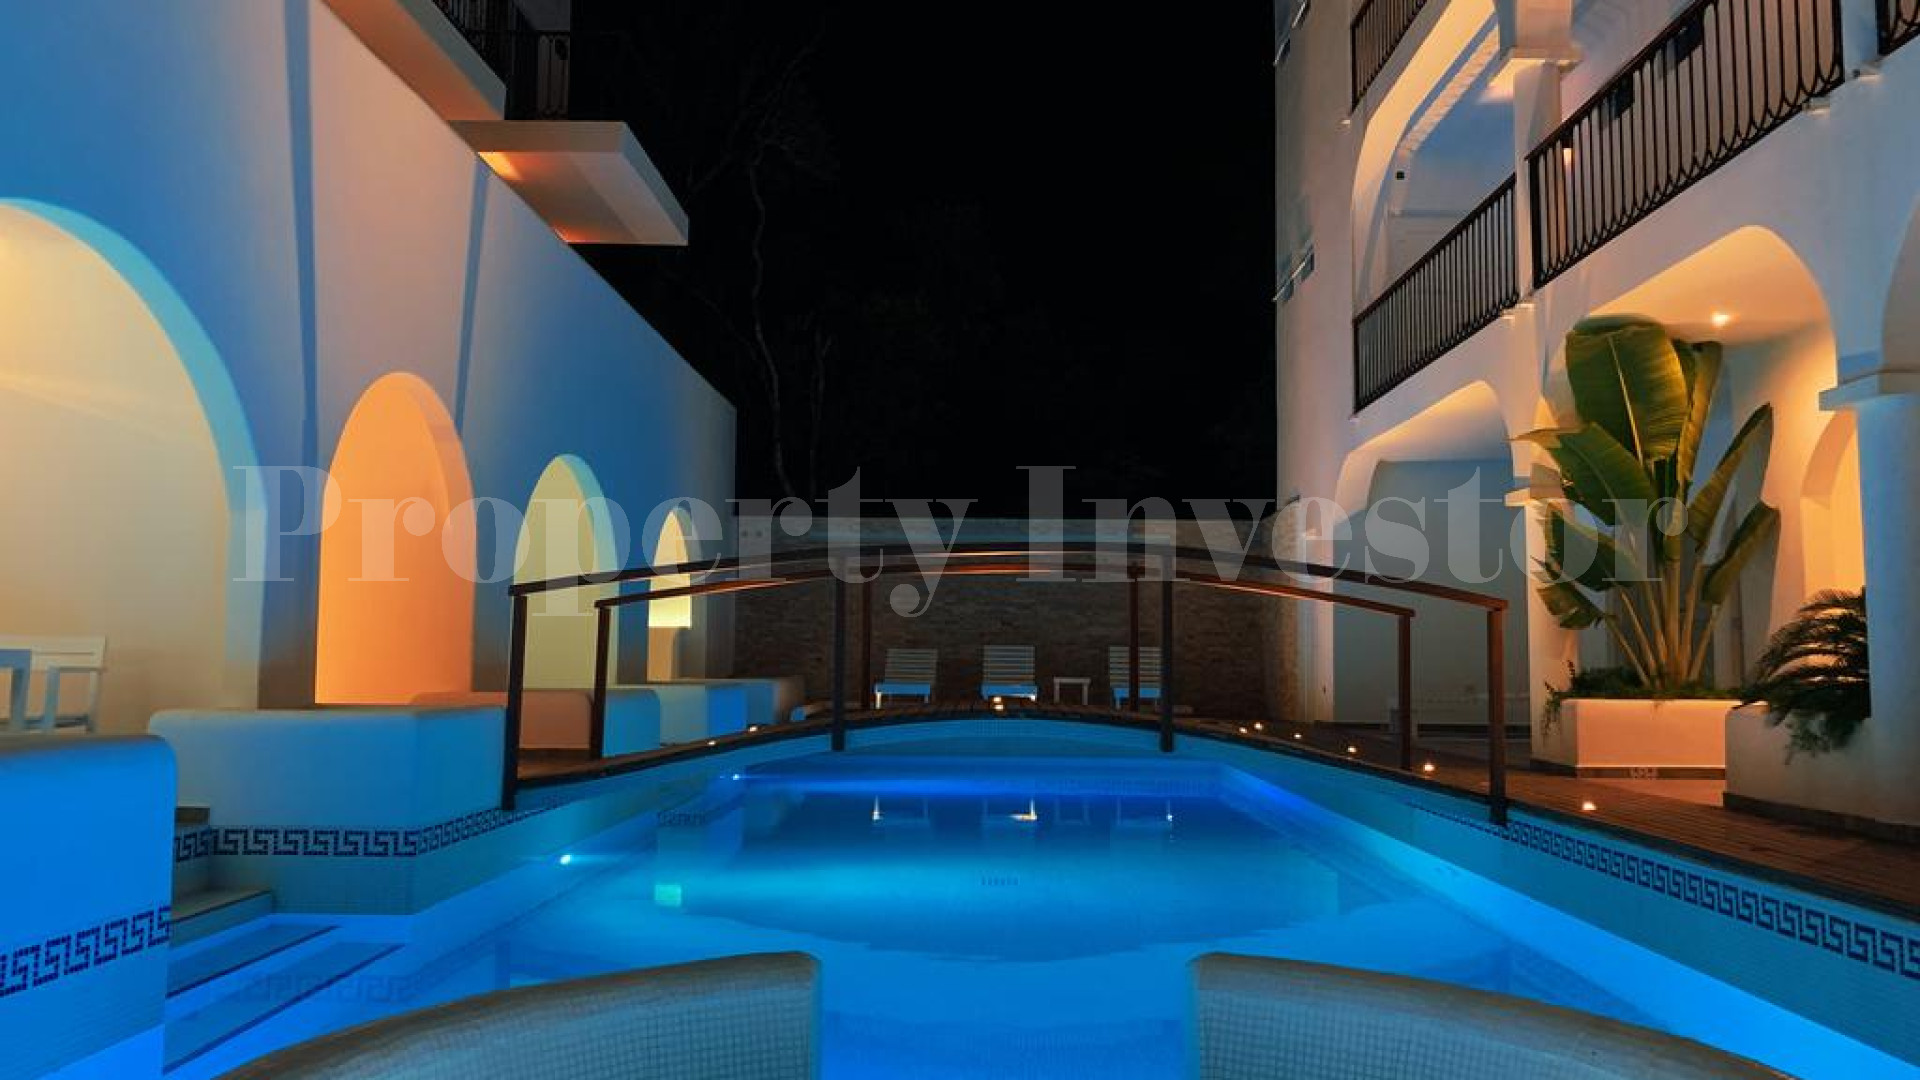 Chic 20 Room Boutique Hotel for Sale Located in Increasingly Popular Area of Tulum, Mexico